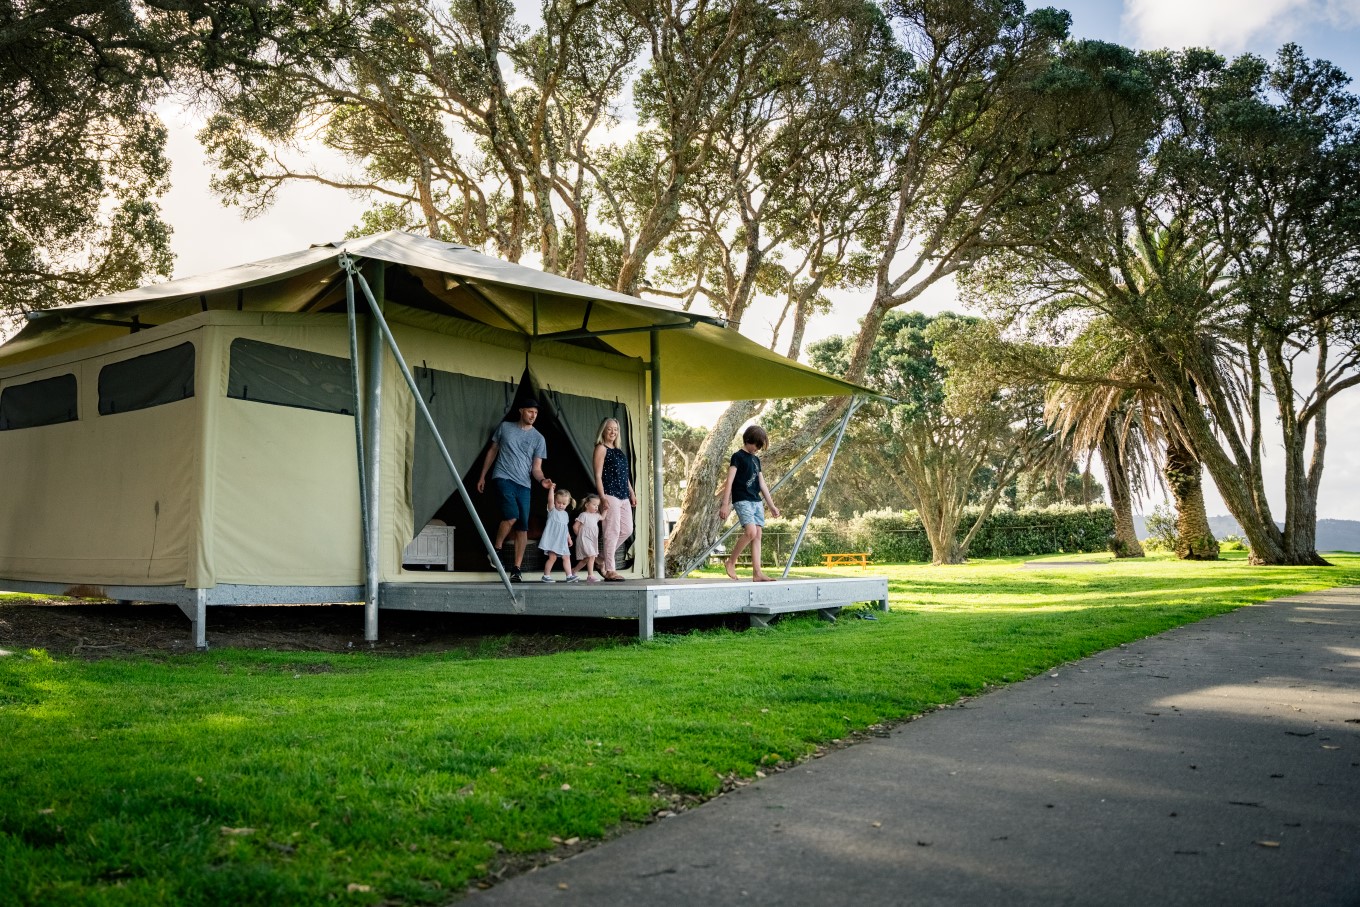 You can experience the getting-back-to-nature fun that is camping without having to pack lots of gear or pitch a tent if you stay in a glamping tent at Ōrewa Beach or Martins Bay Holiday Parks.